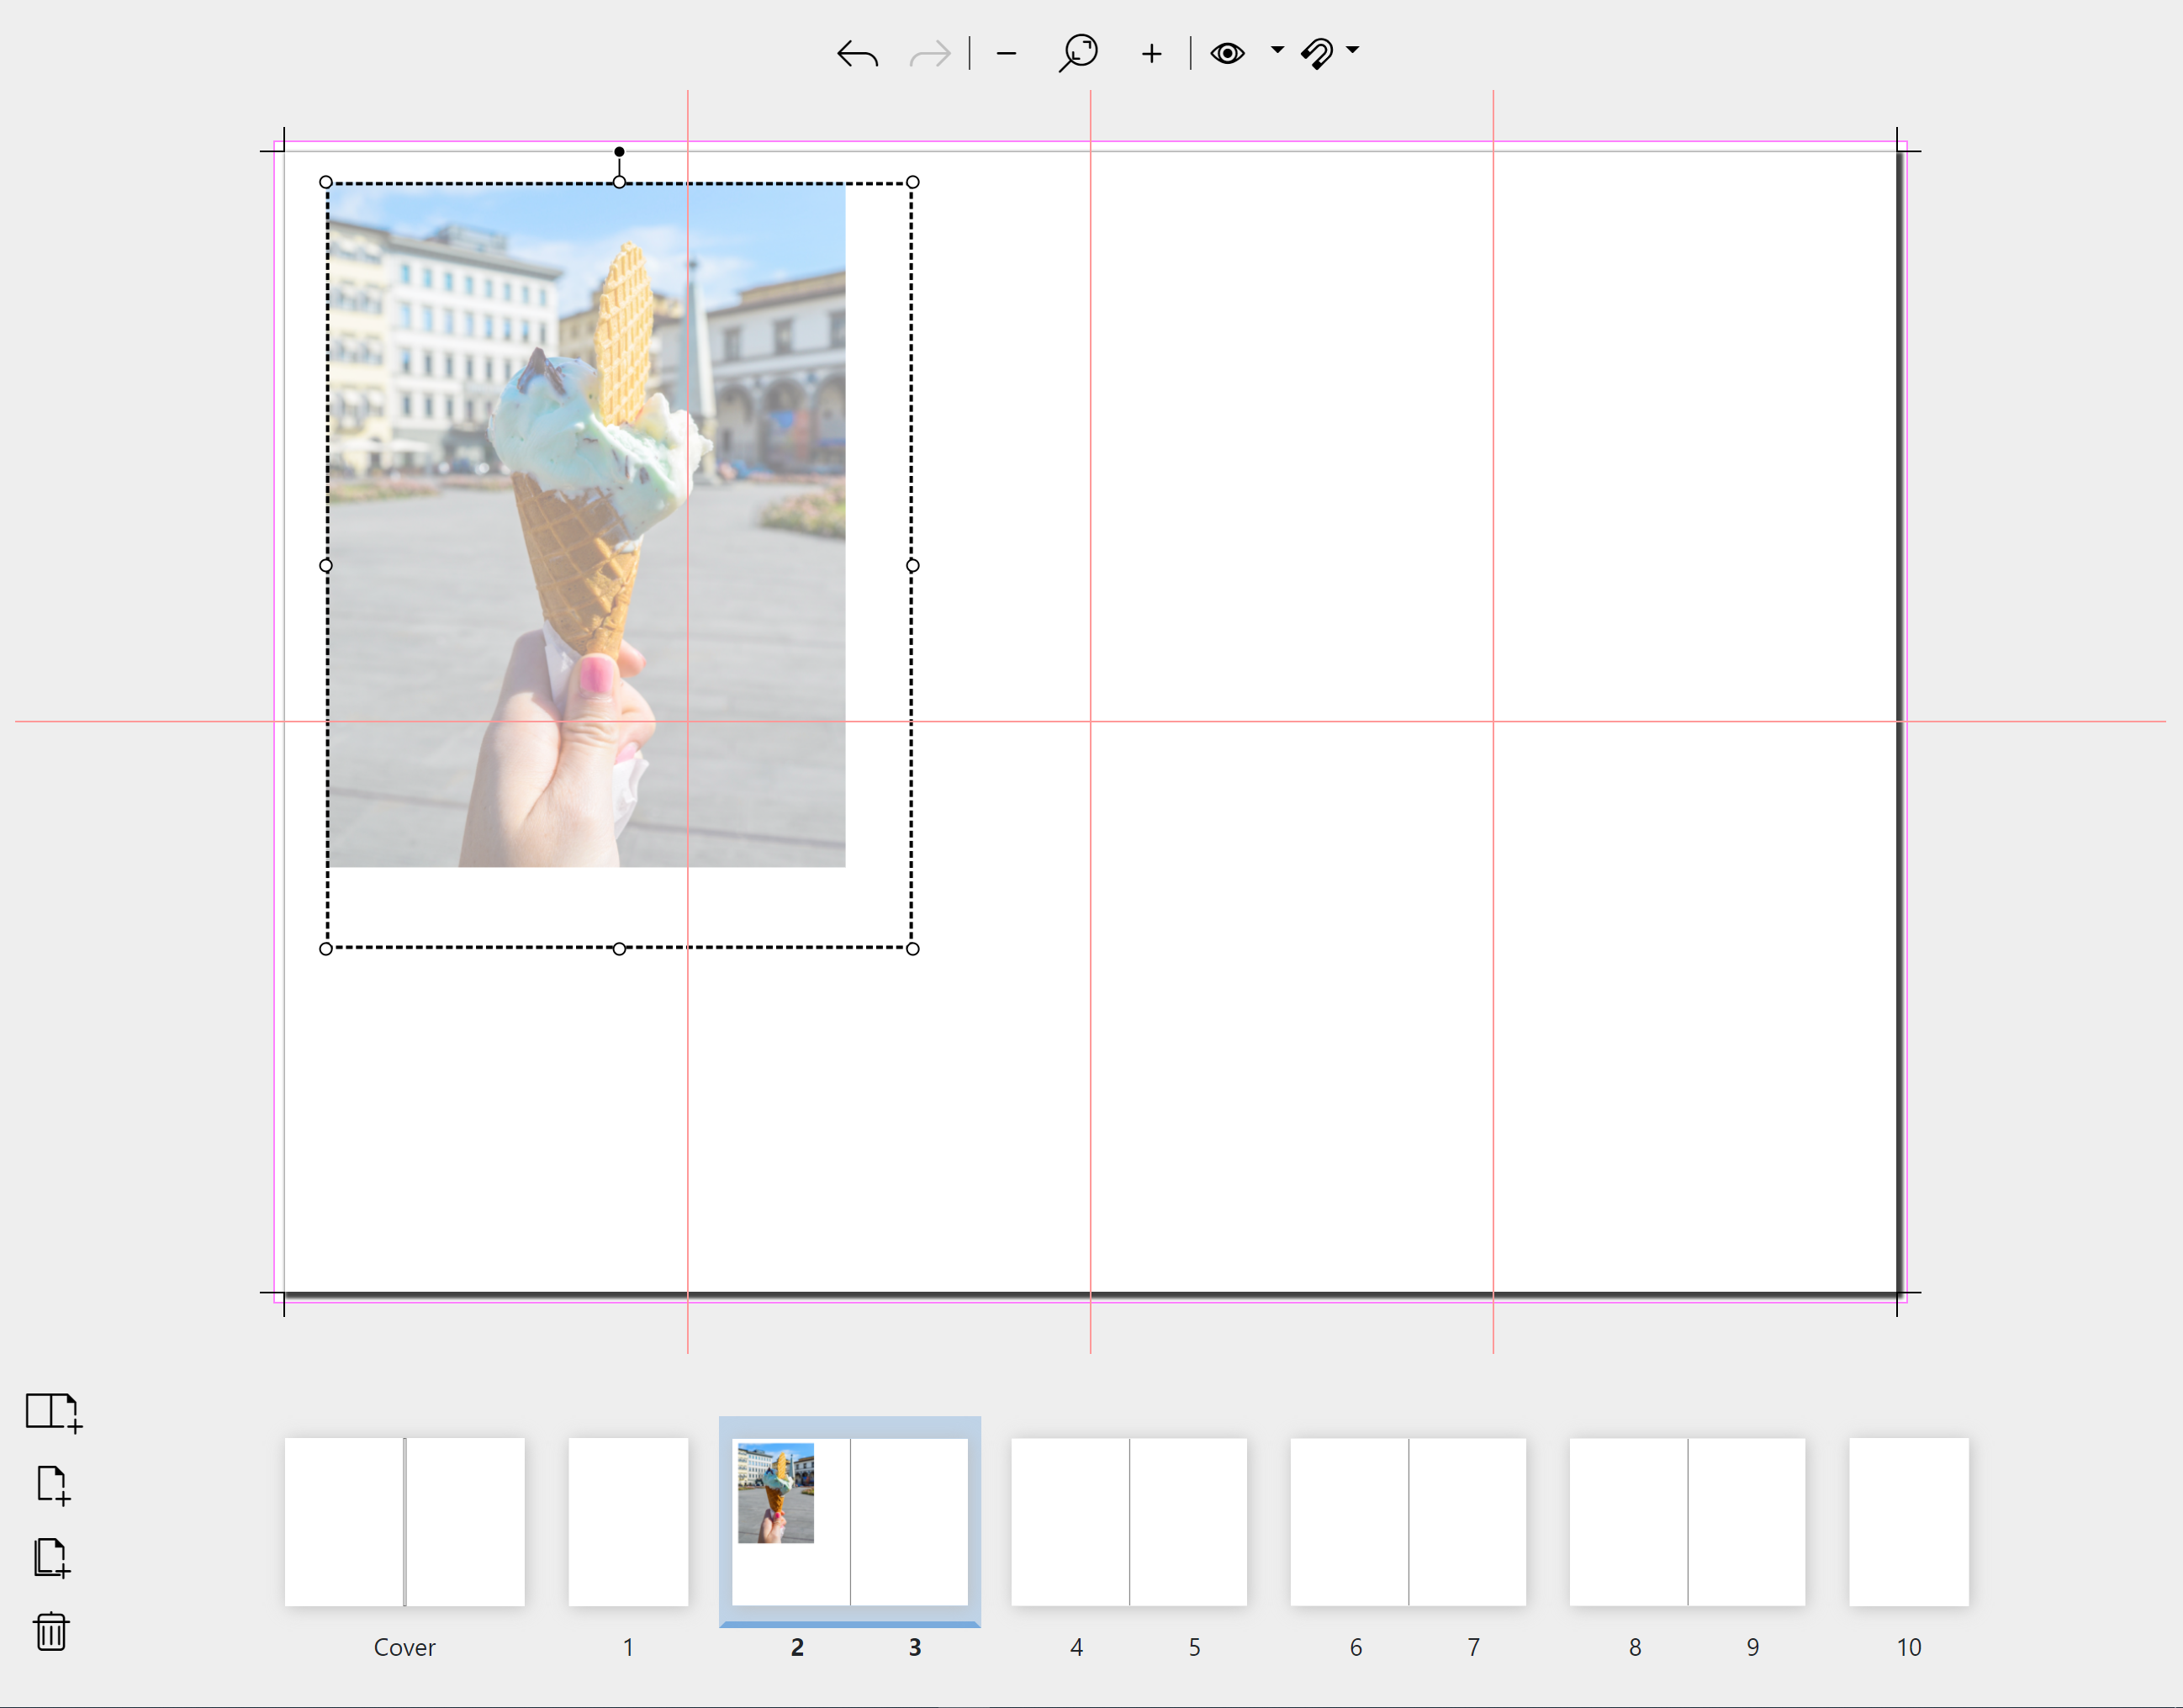 Resizing an image in the Page editor